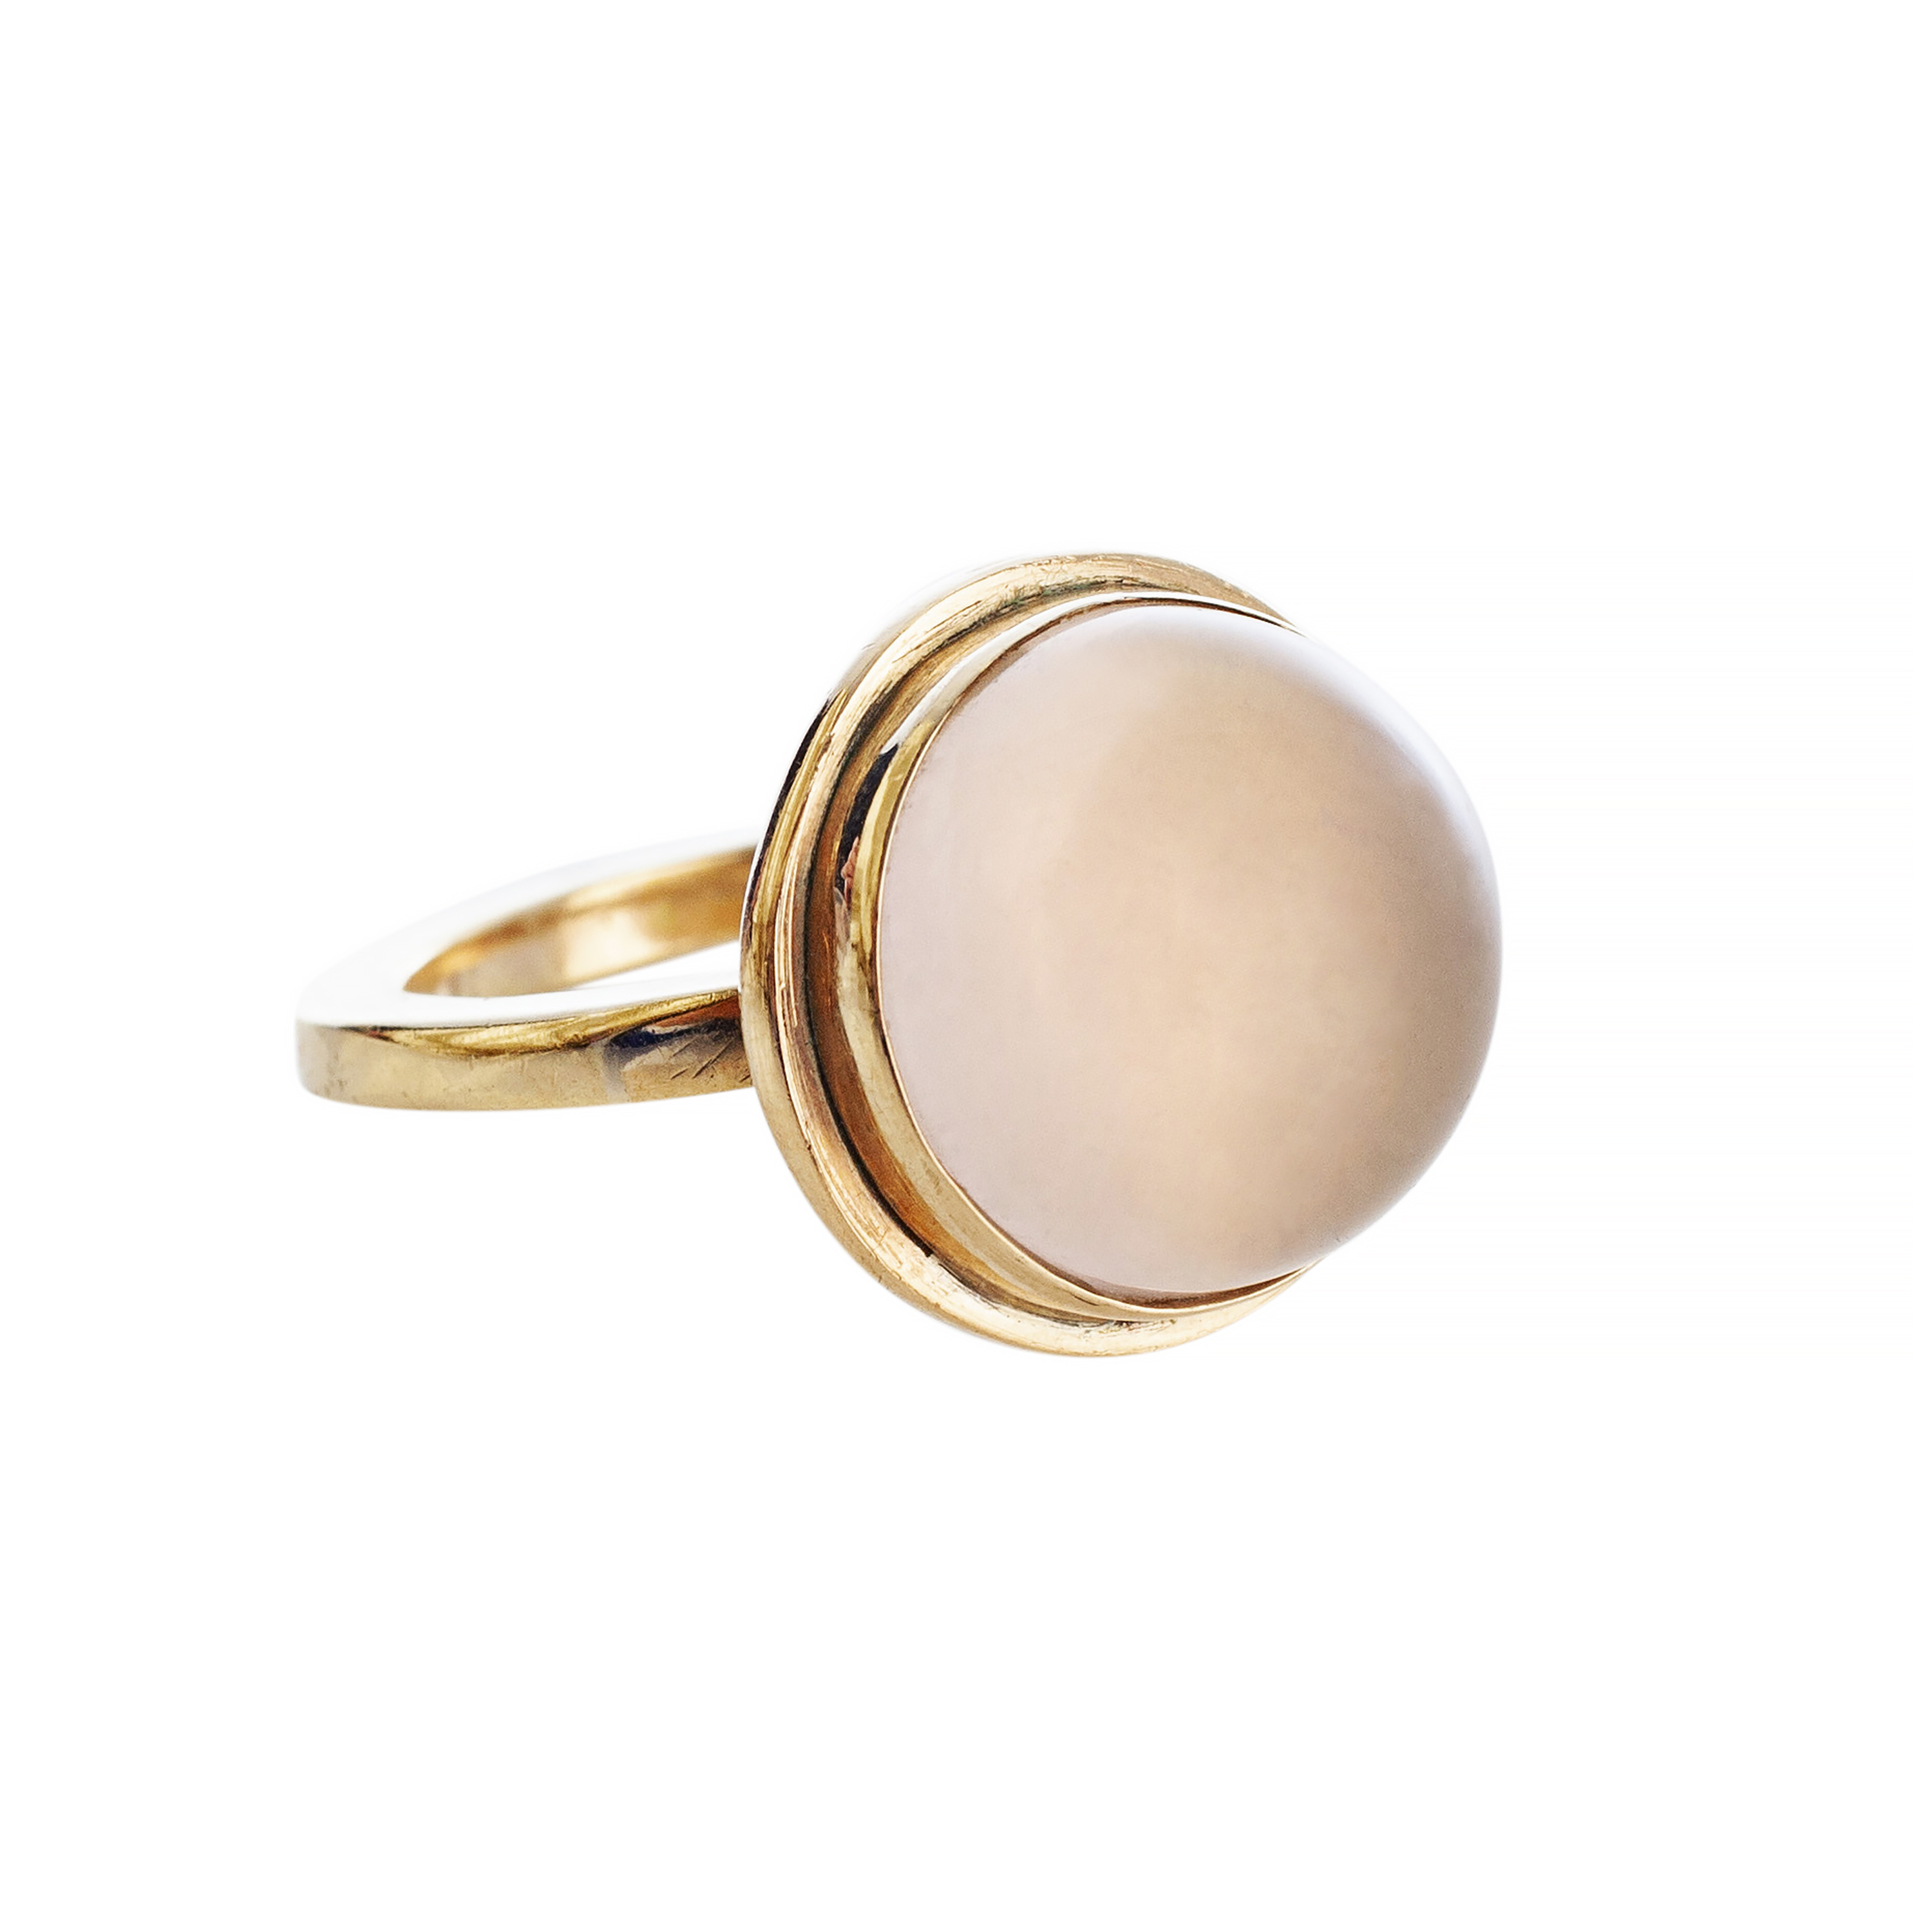 Beautiful Rose Quartz and Gold ring from Ardmore Jewellery. All our pieces are made in Ardmore Co. Waterford in our studio by the sea.